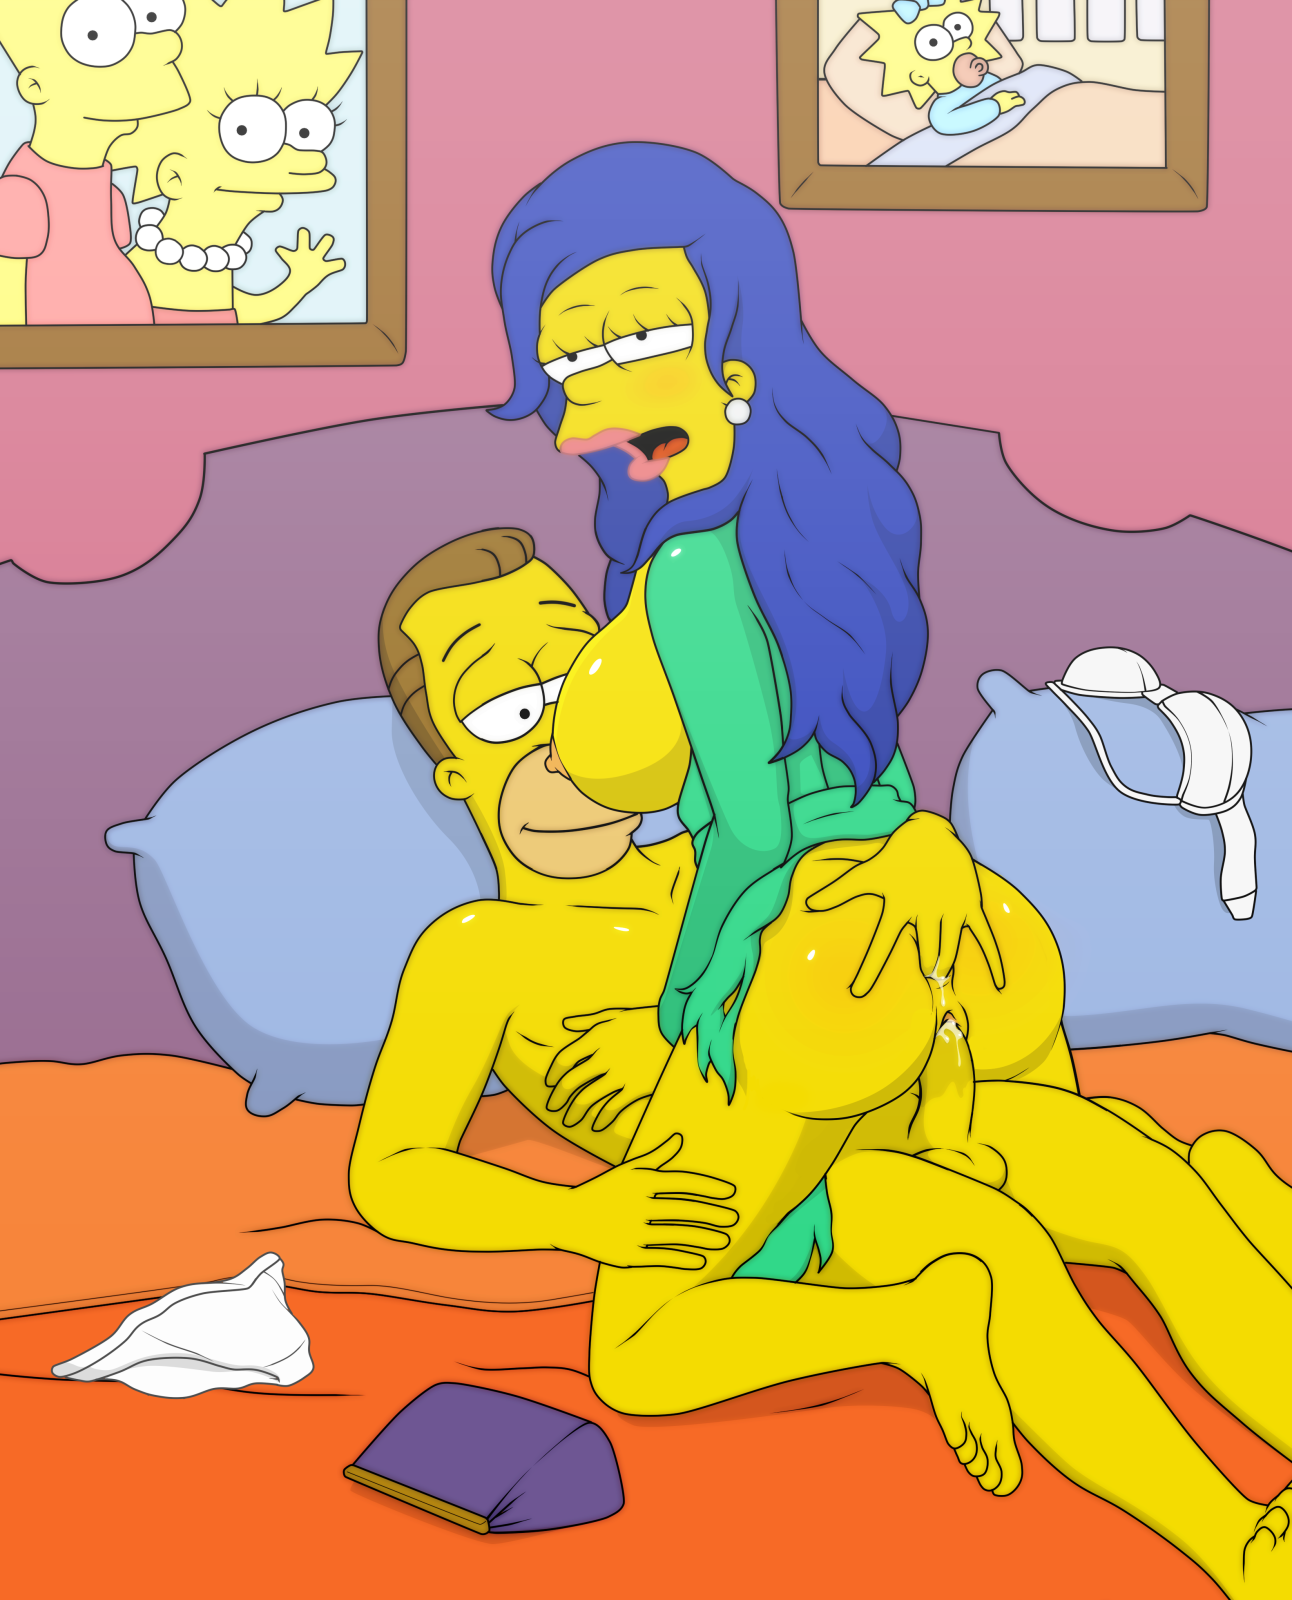 1788909_Herb_Powell_Marge_Simpson_Sfan_The_Simpsons.png